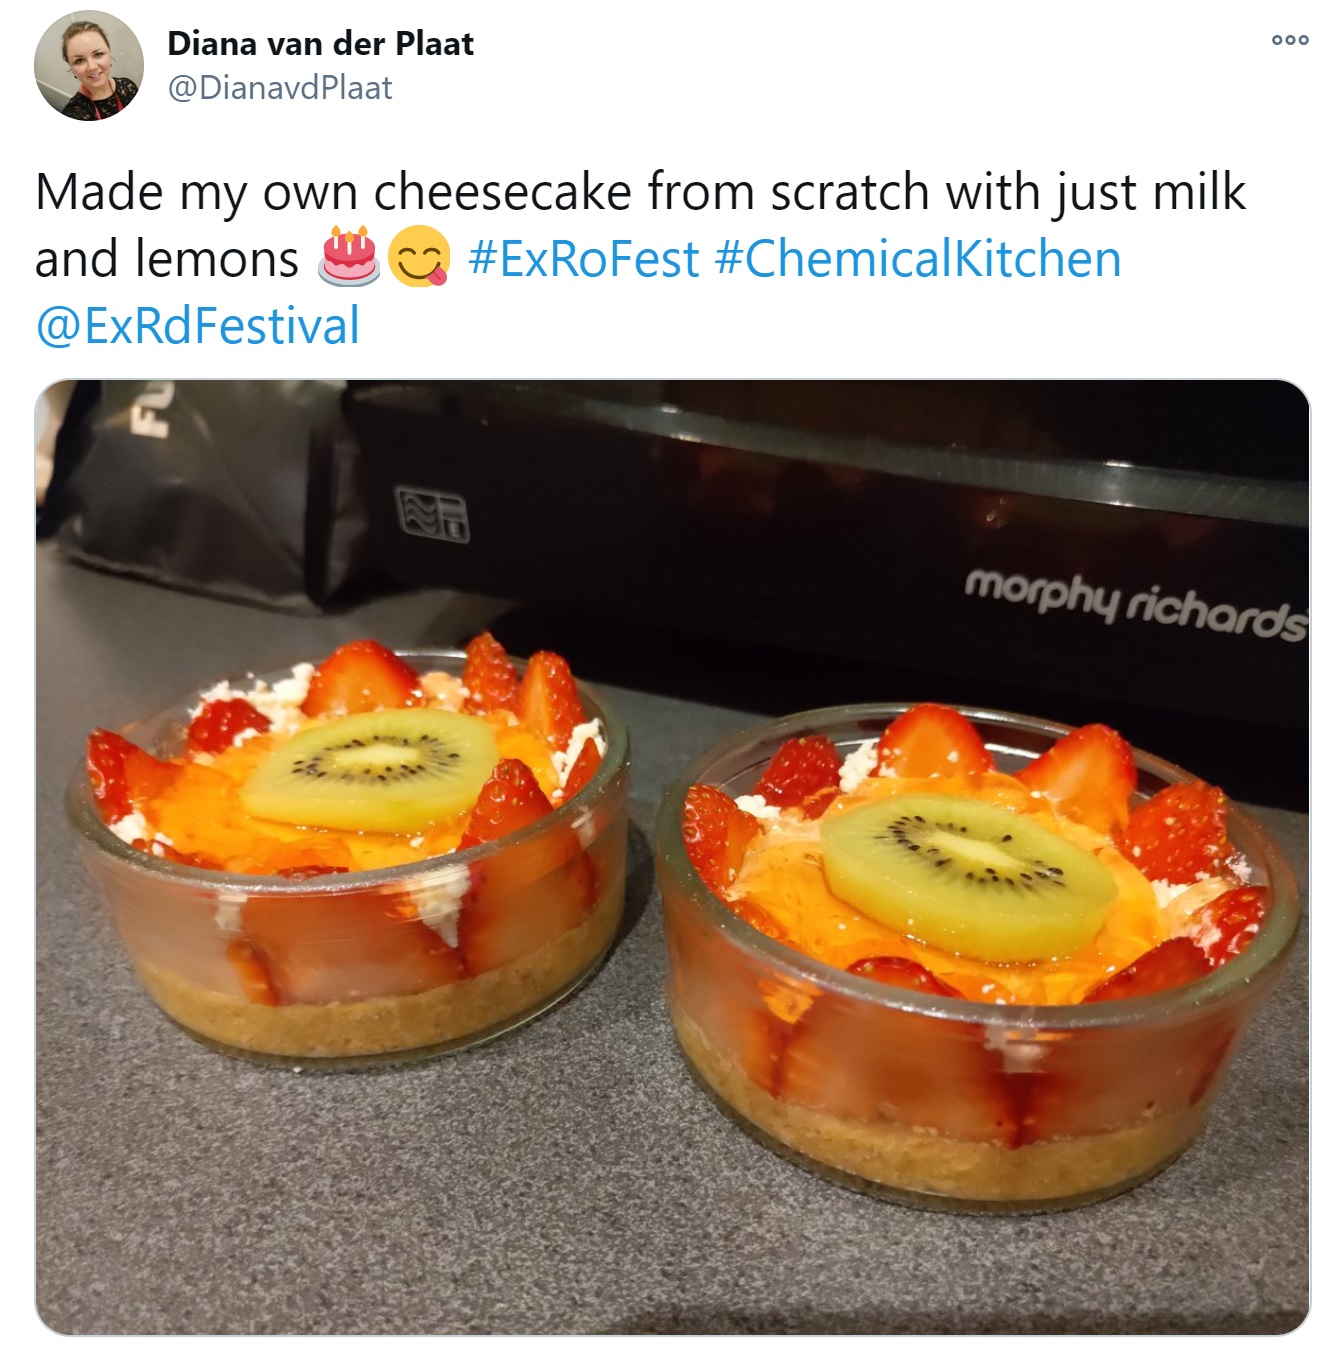 Tweet showing cheesecakes made at home